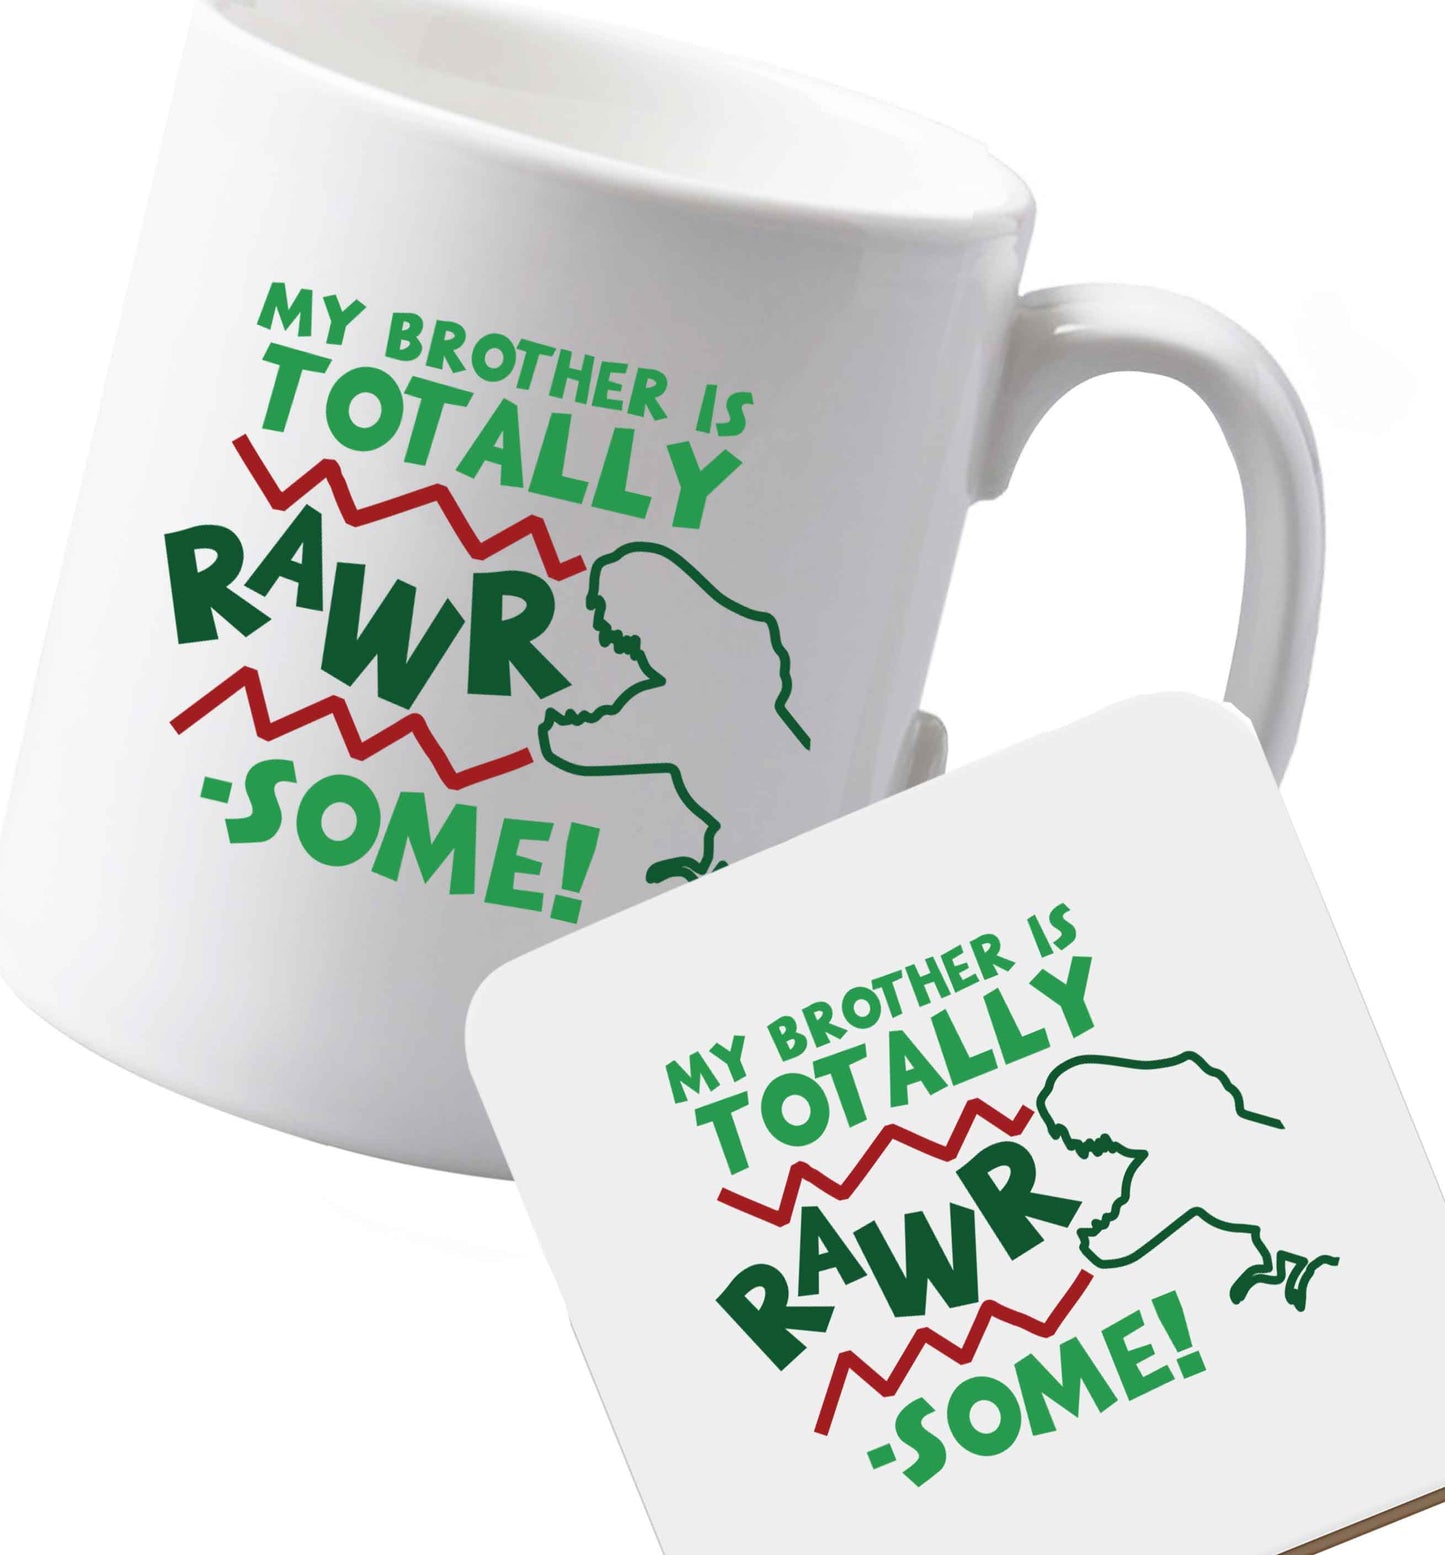 10 oz Ceramic mug and coaster My brother is totally rawrsome both sides